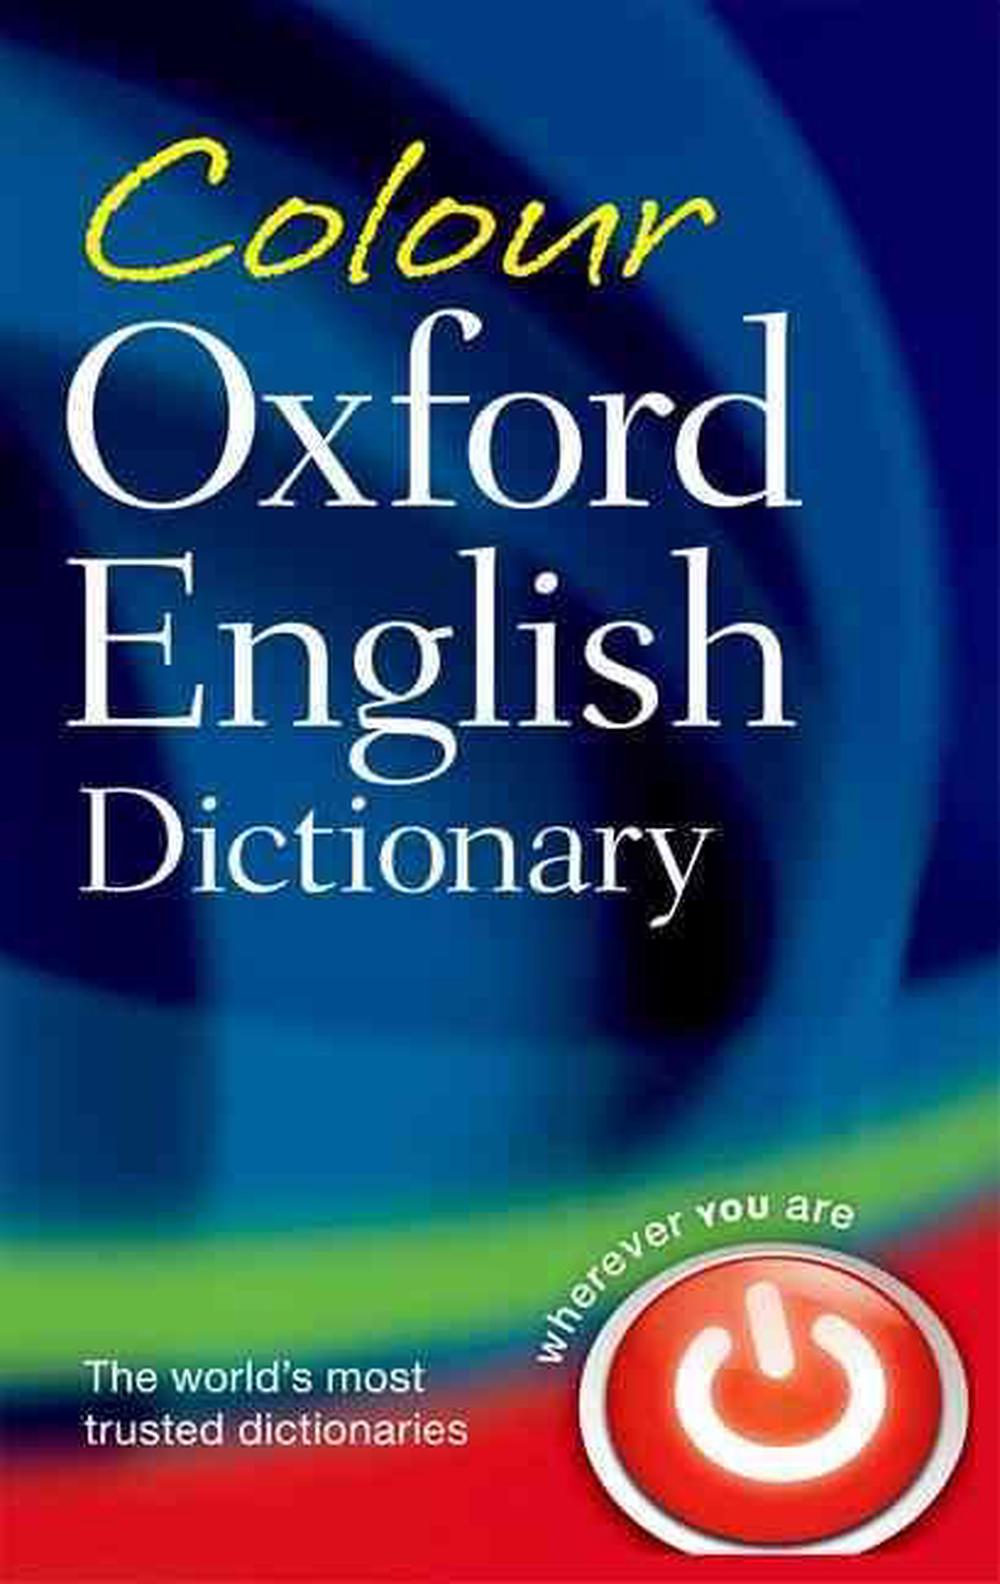 oxford english dictionary critical thinking